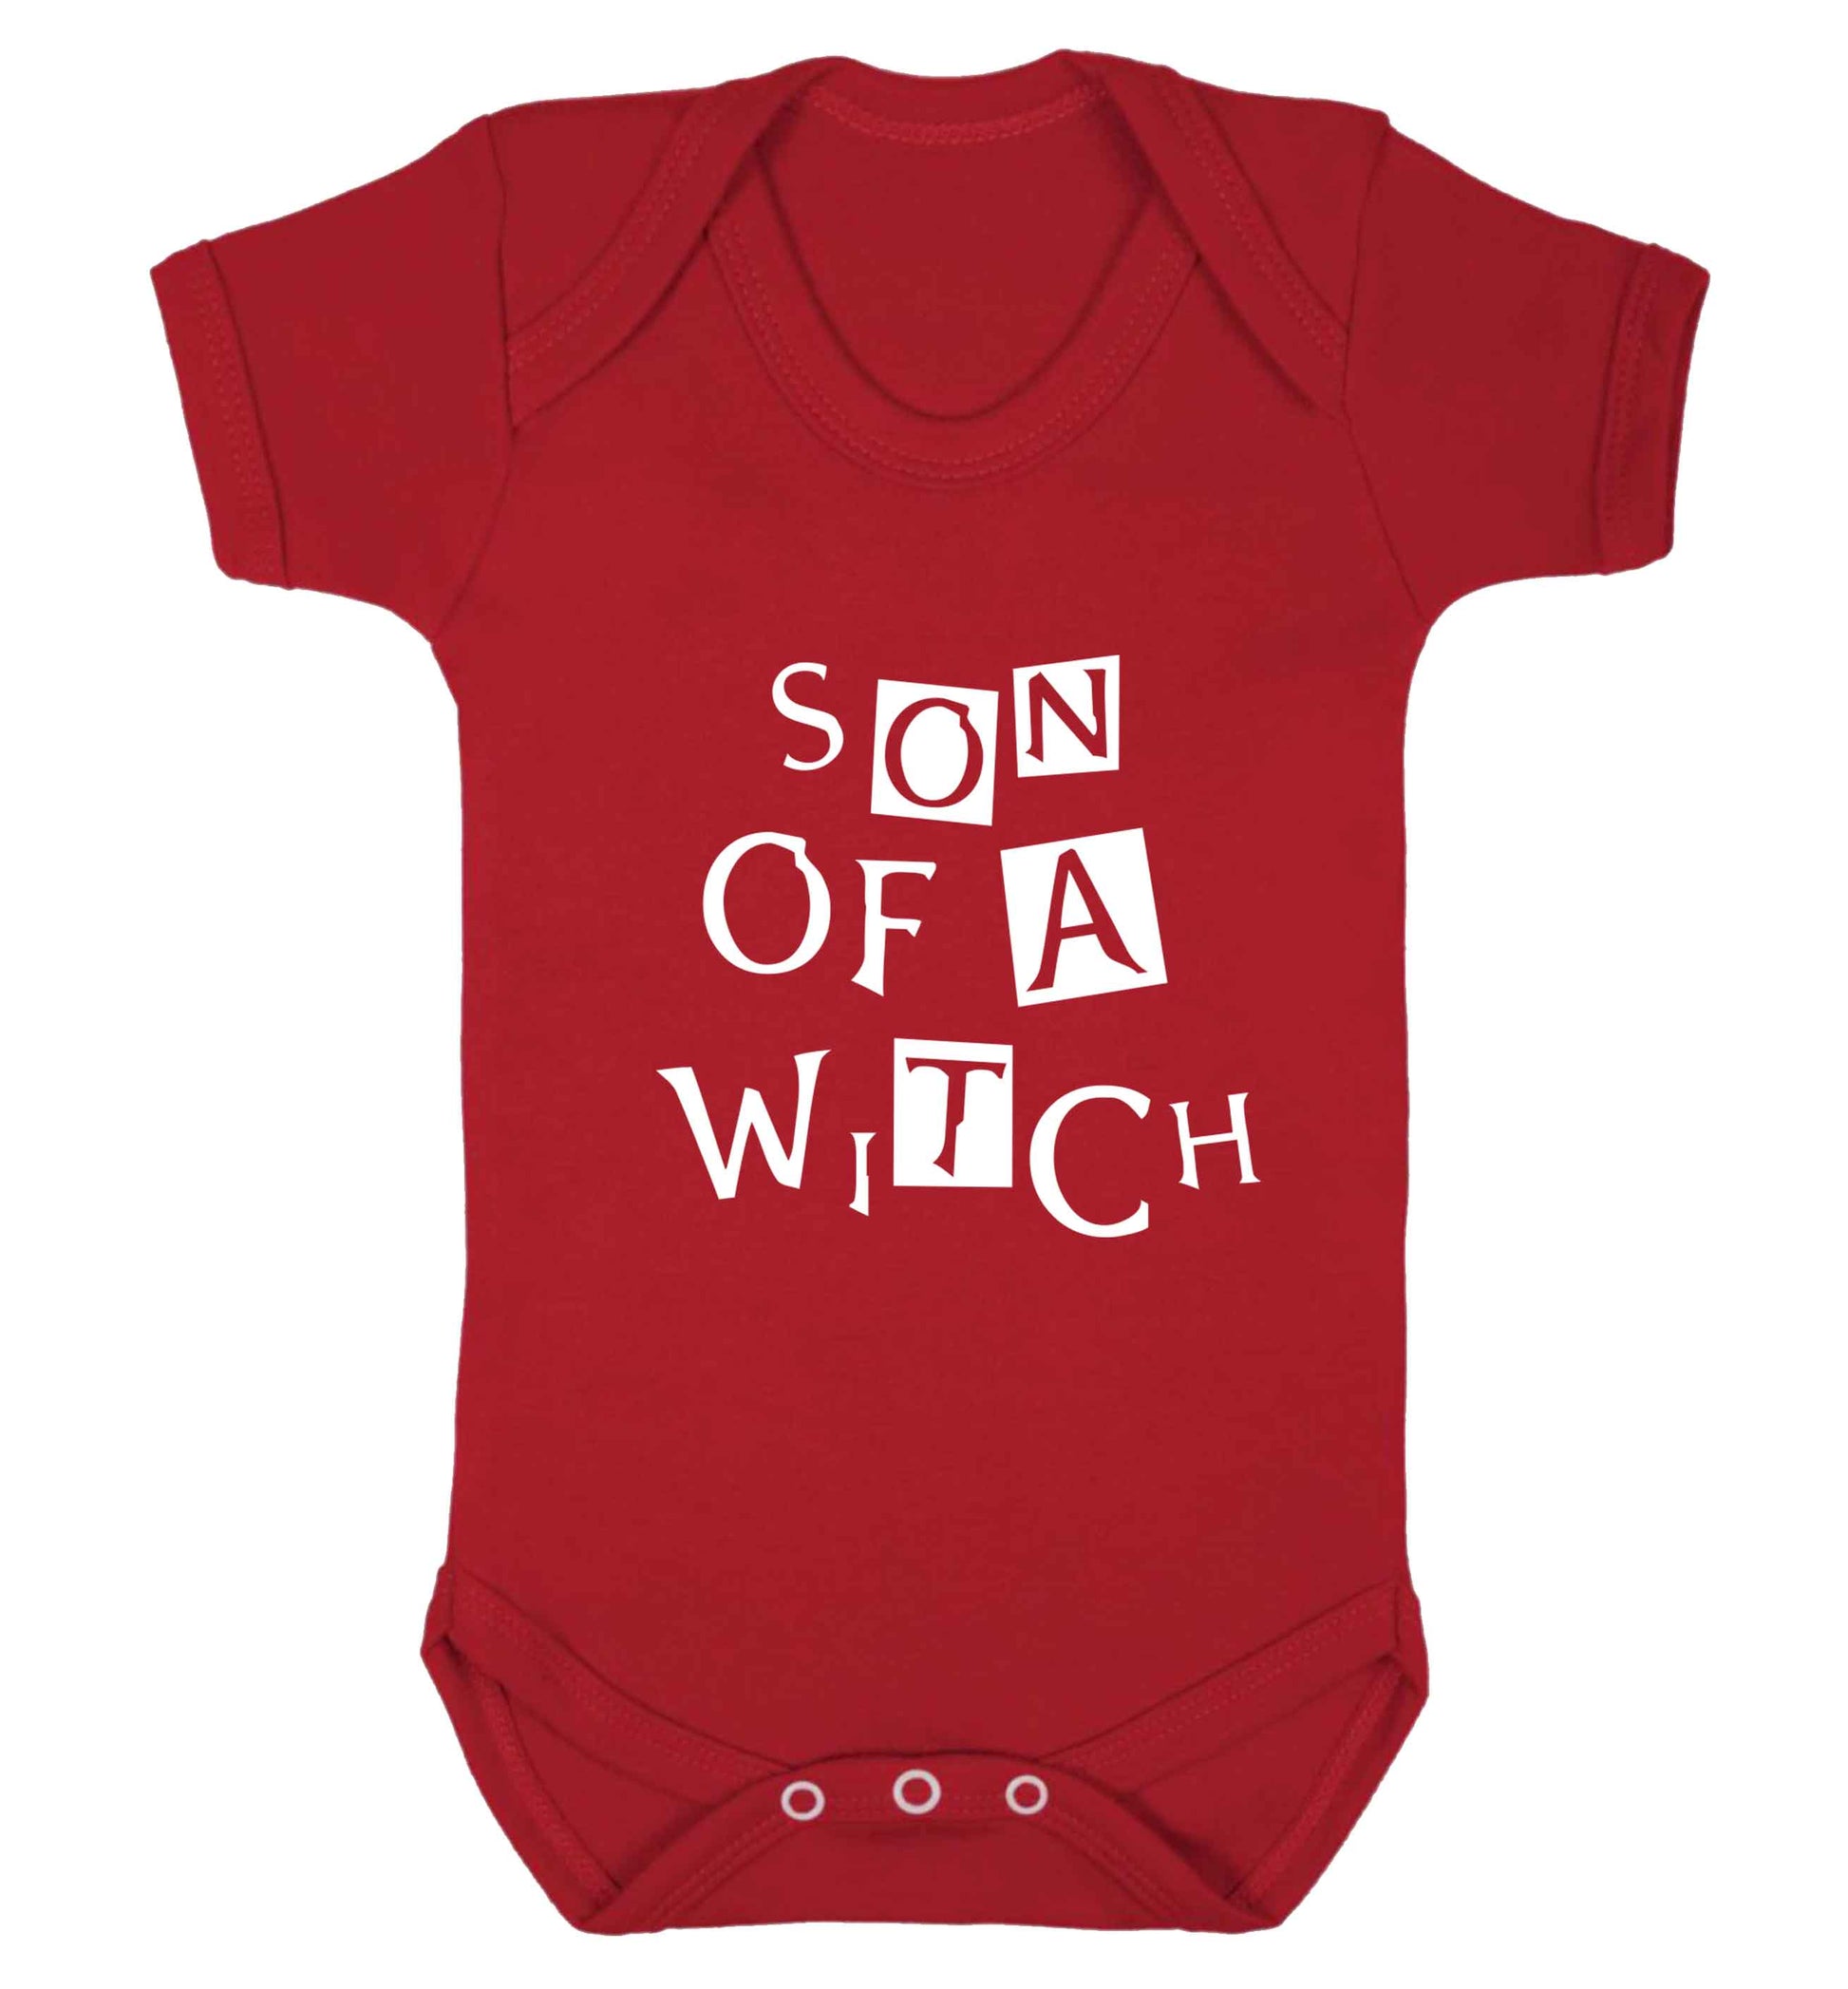 Son of a witch baby vest red 18-24 months